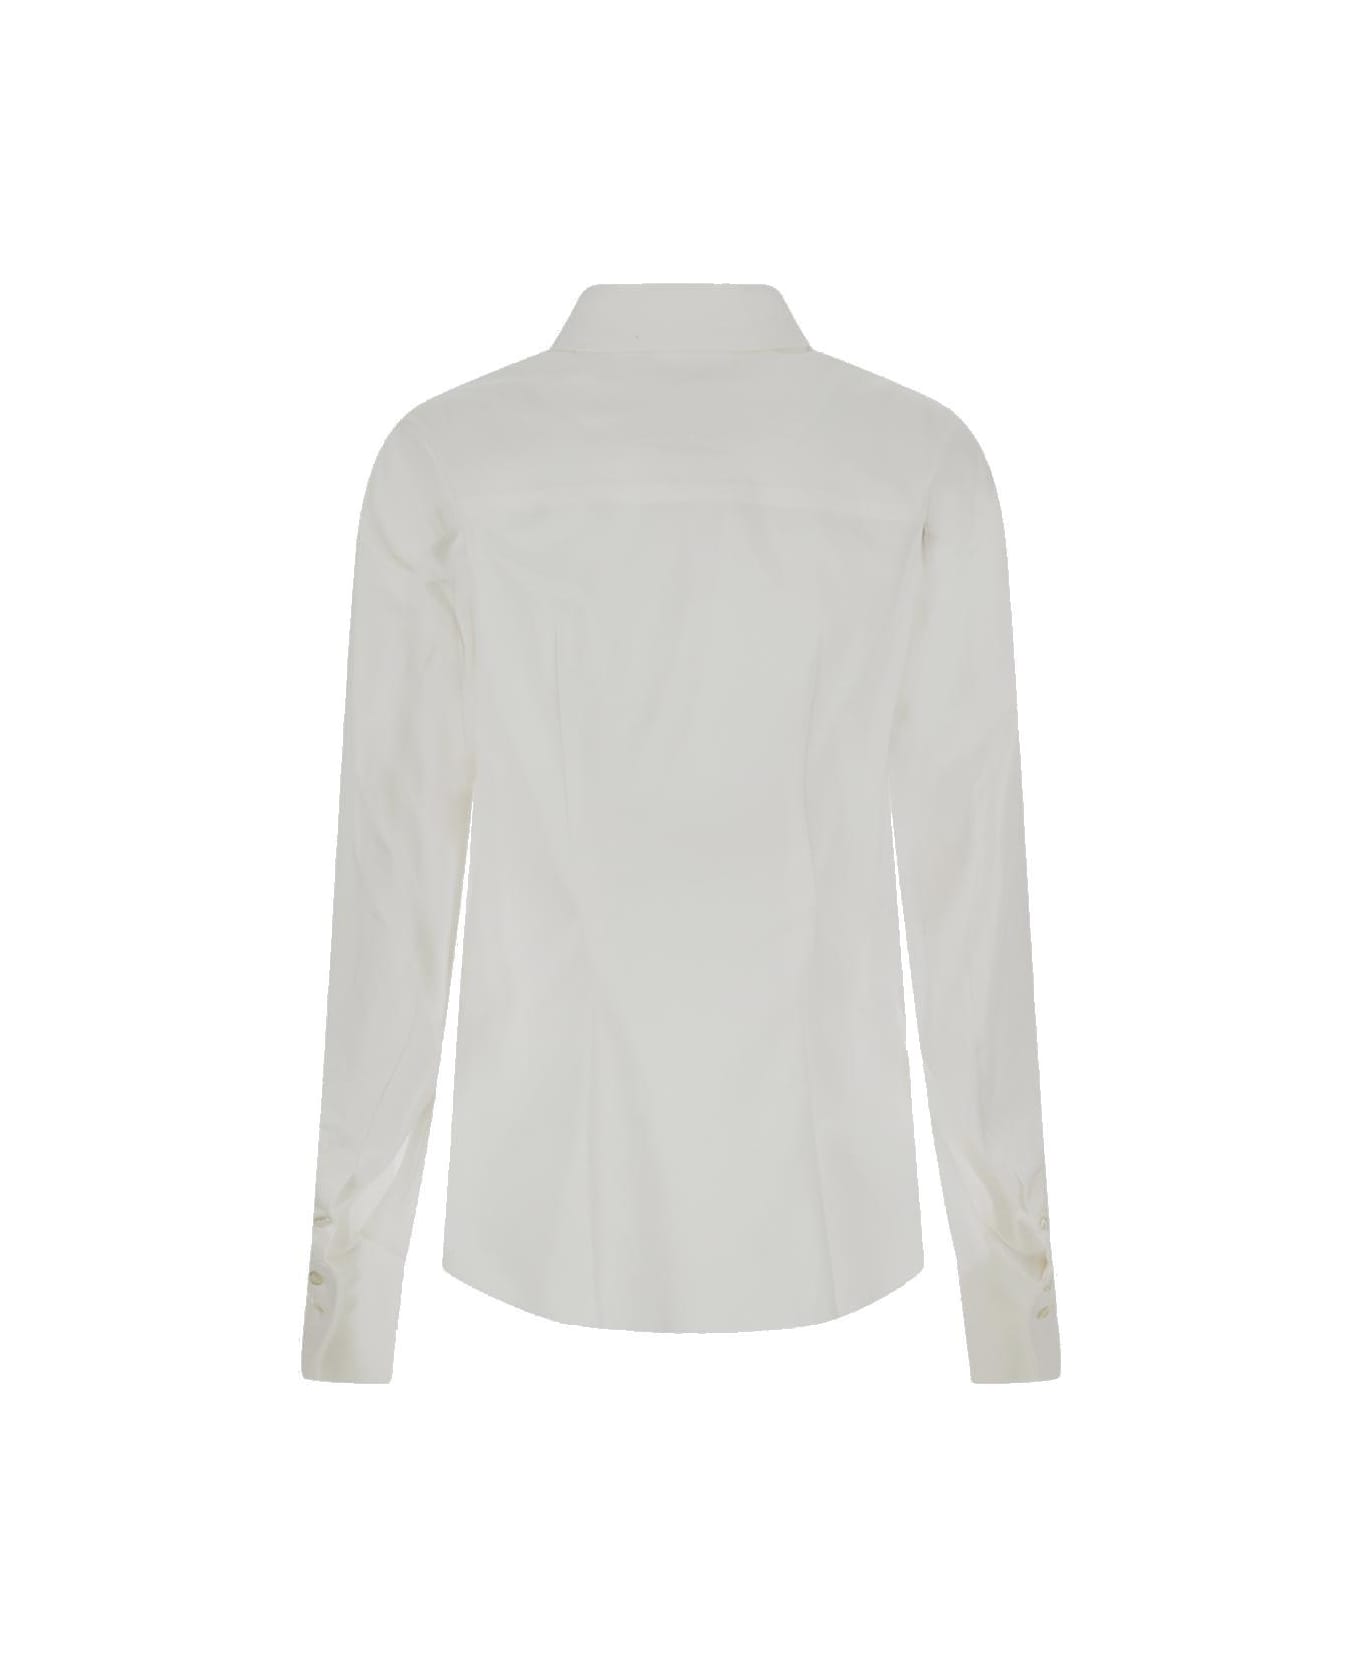 SportMax Button-up Long Sleeved Shirt - WHITE シャツ